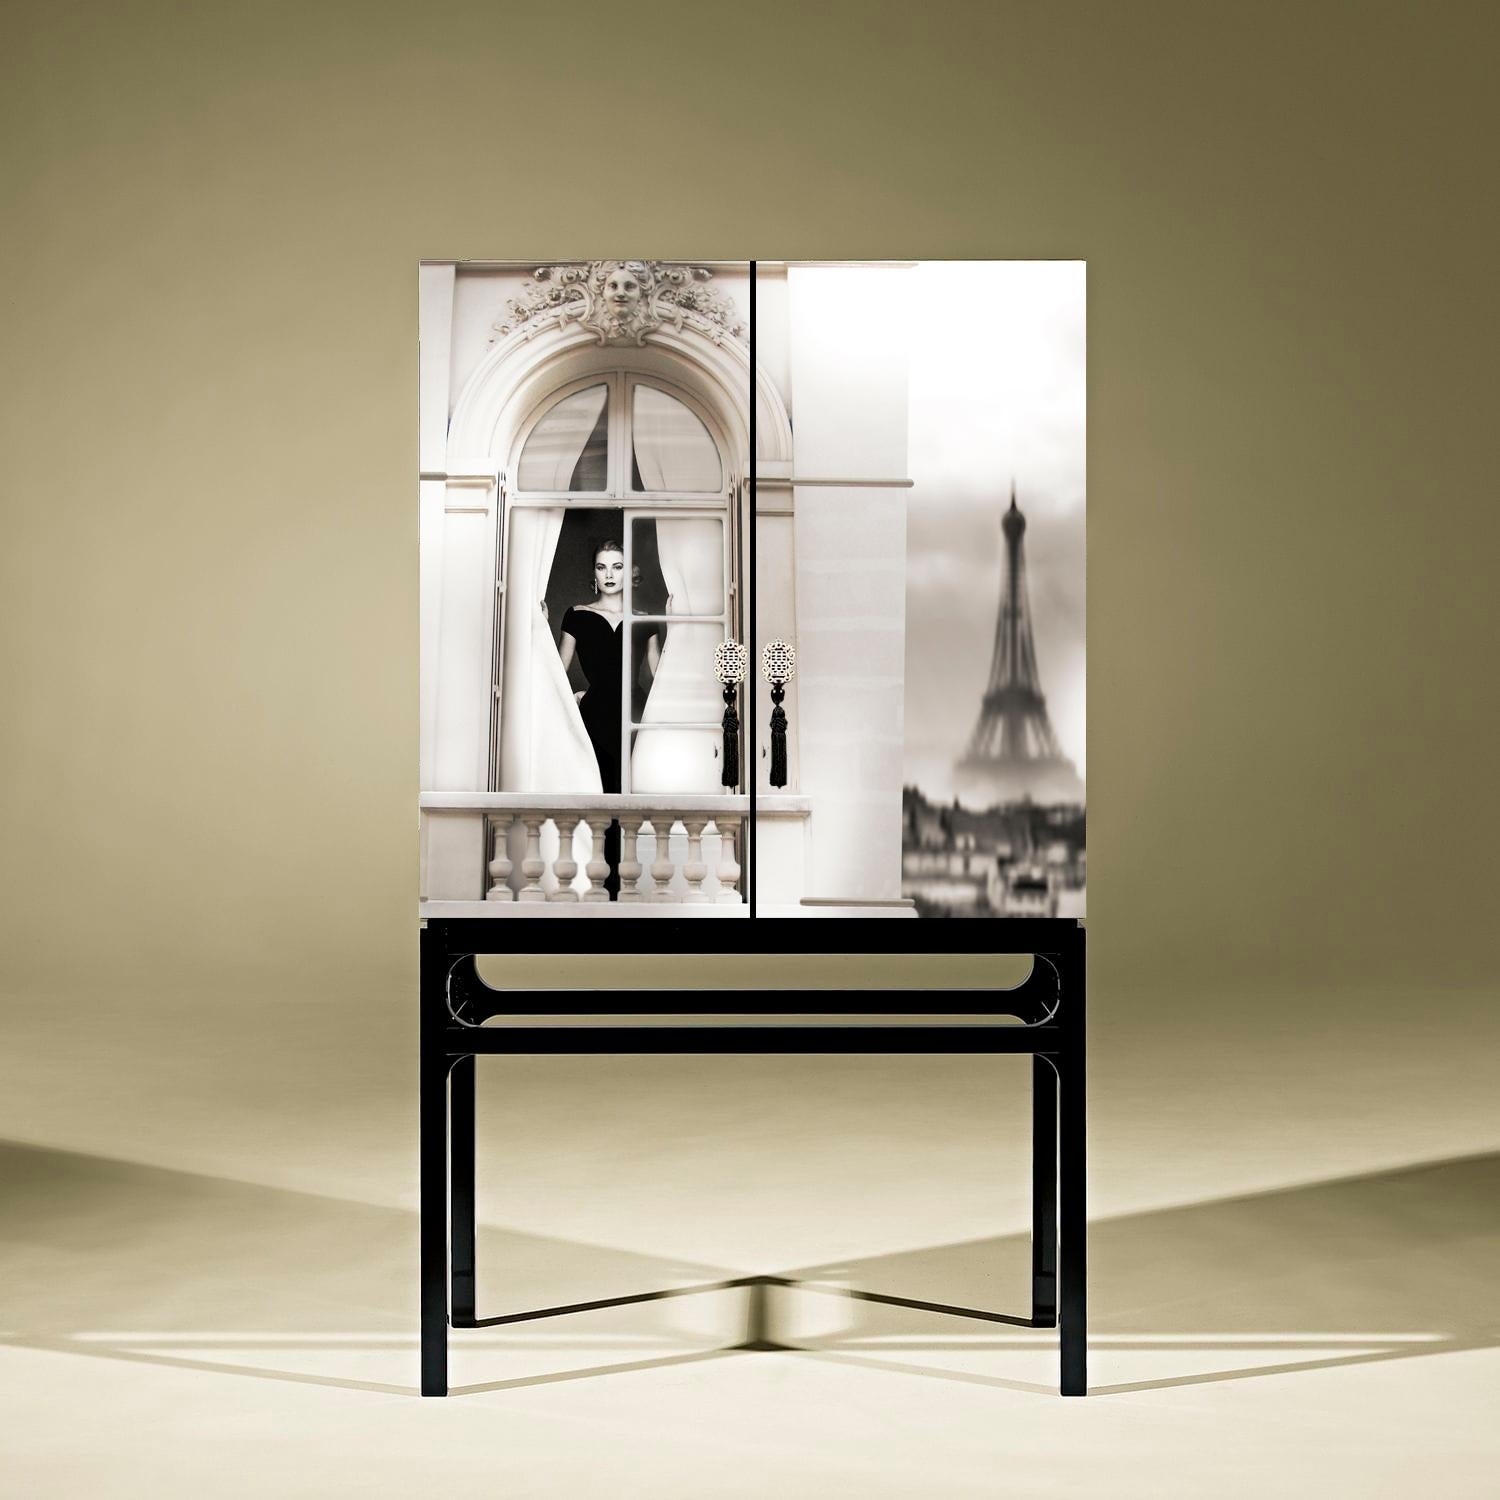 Contemporary Rive Gauche Grace Kelly Cabinet with Artistic Intervention by Axel Crieger For Sale